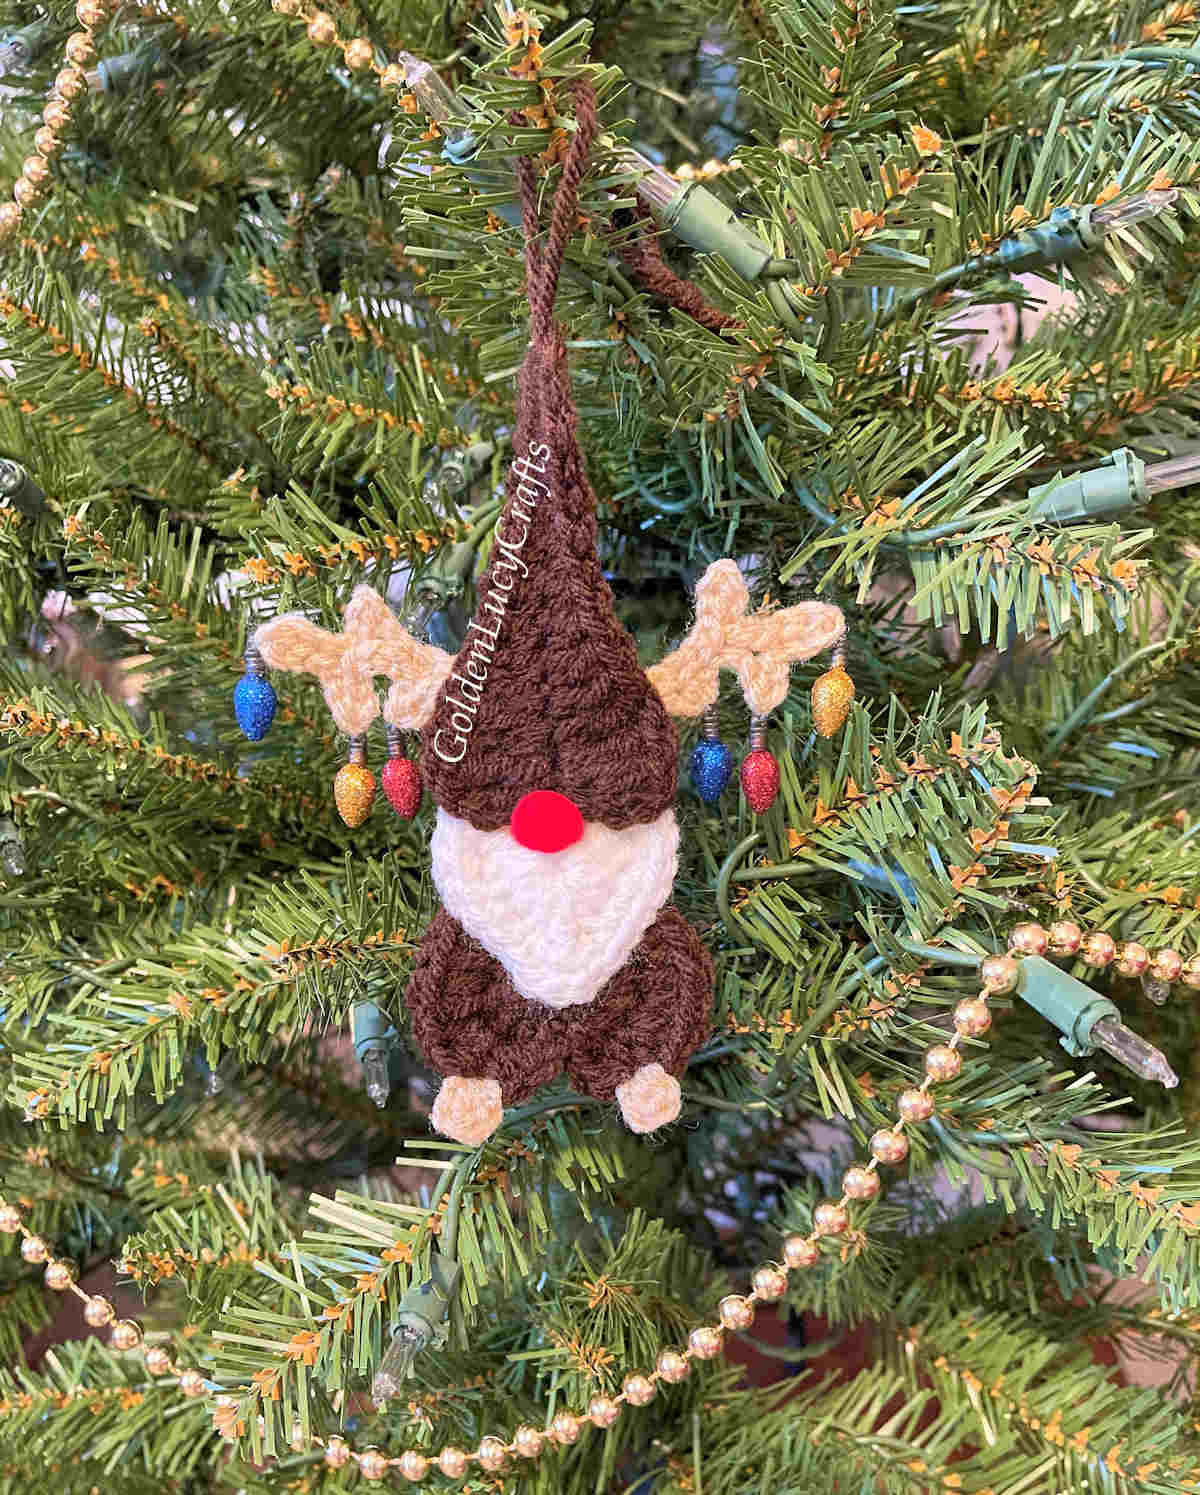 Crochet reindeer gnome ornament on a Christmas tree.